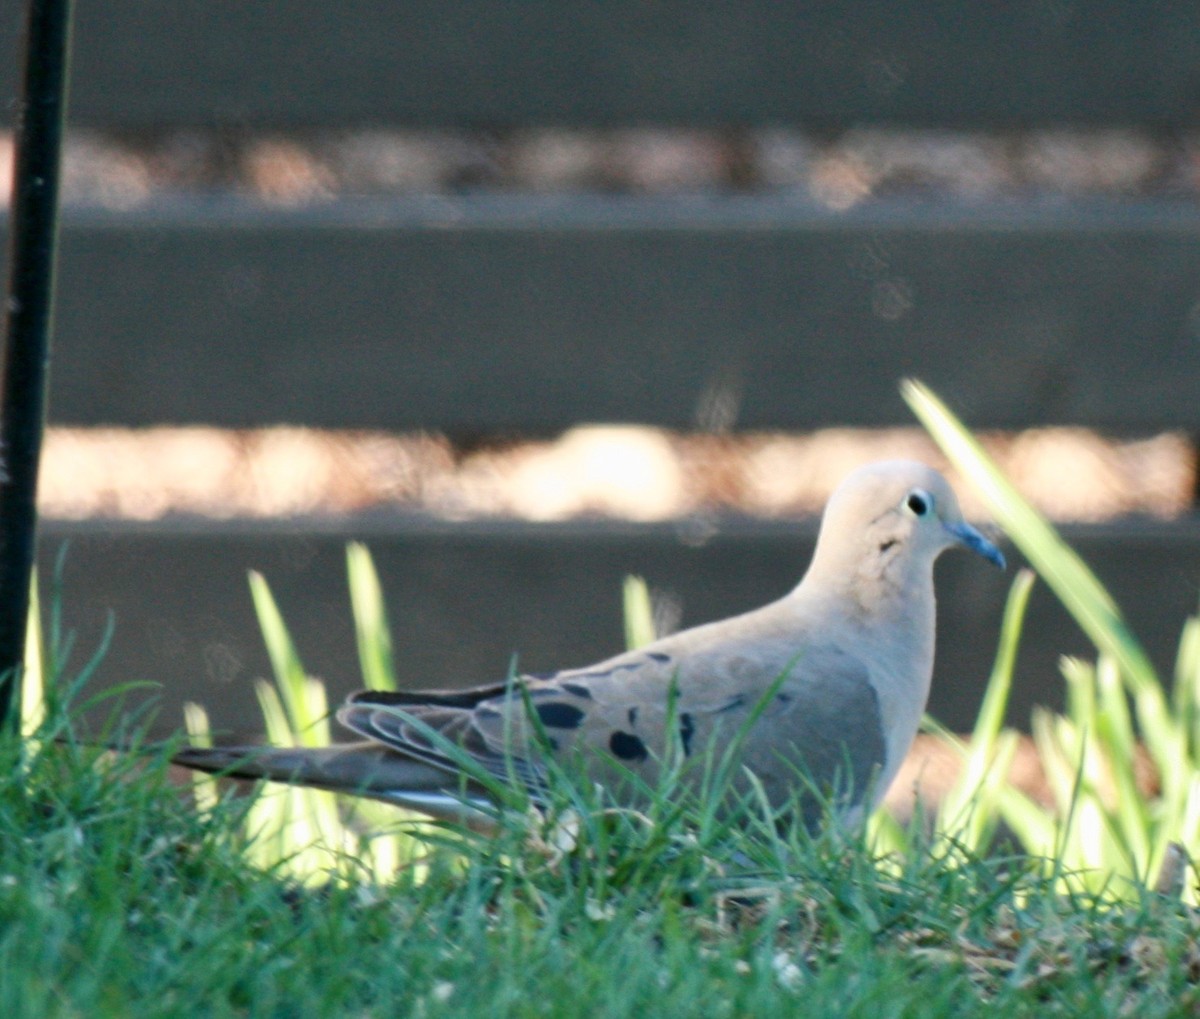 Mourning Dove - Renee Coon